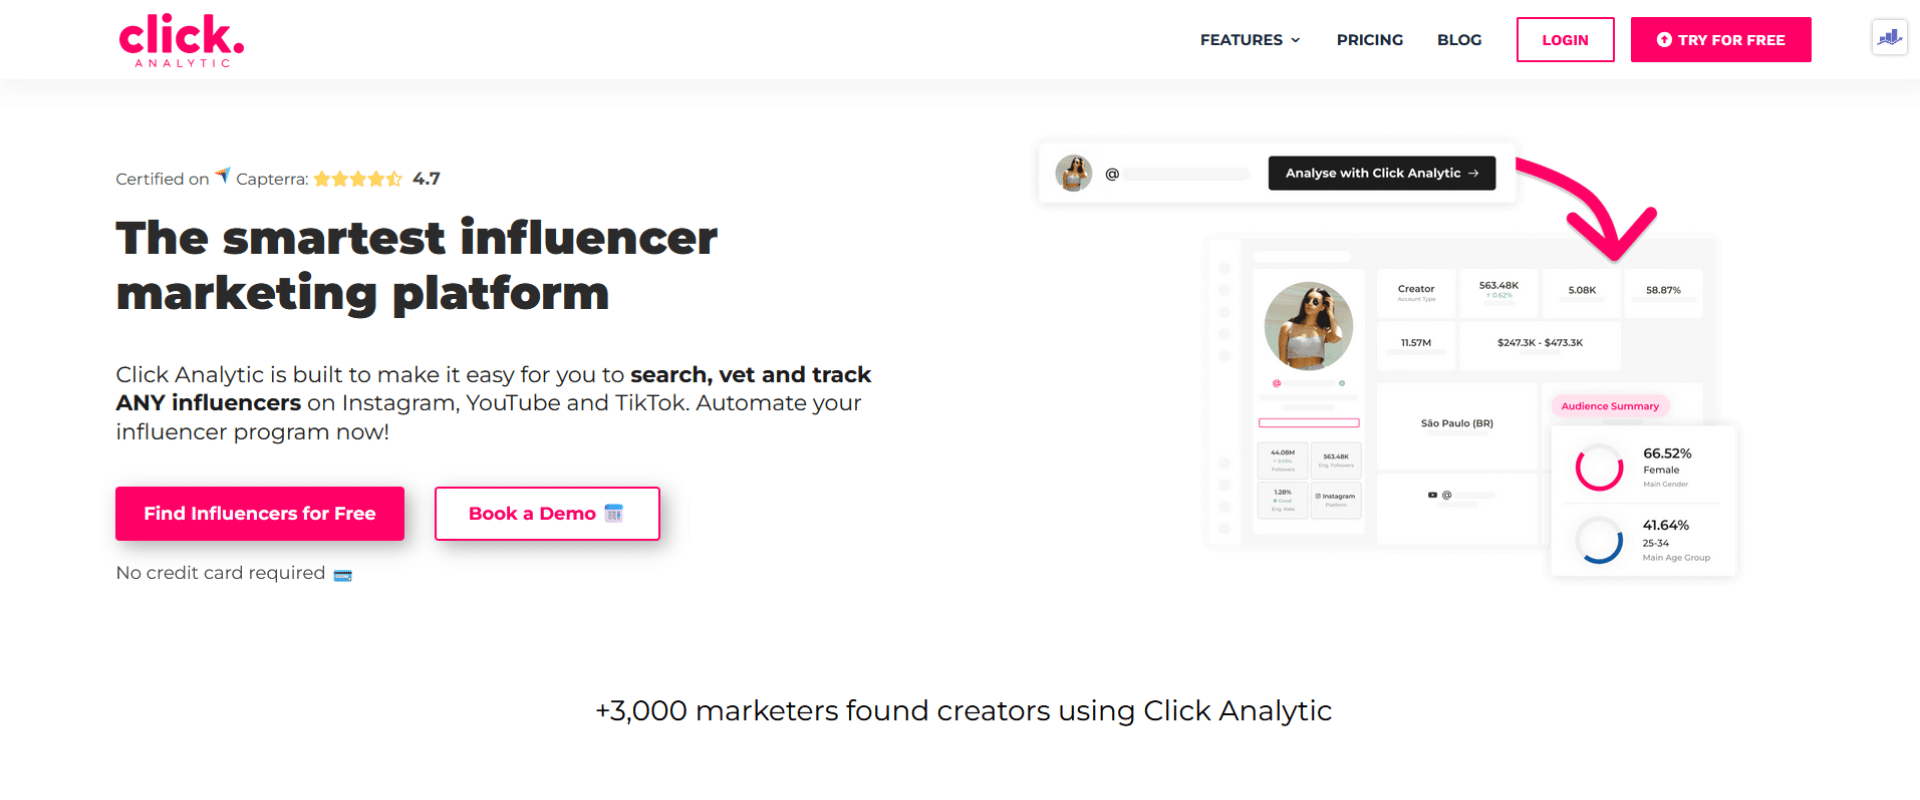 Click is the fastest growing influencer marketing platform. Add it to your influencer marketing toolkit.